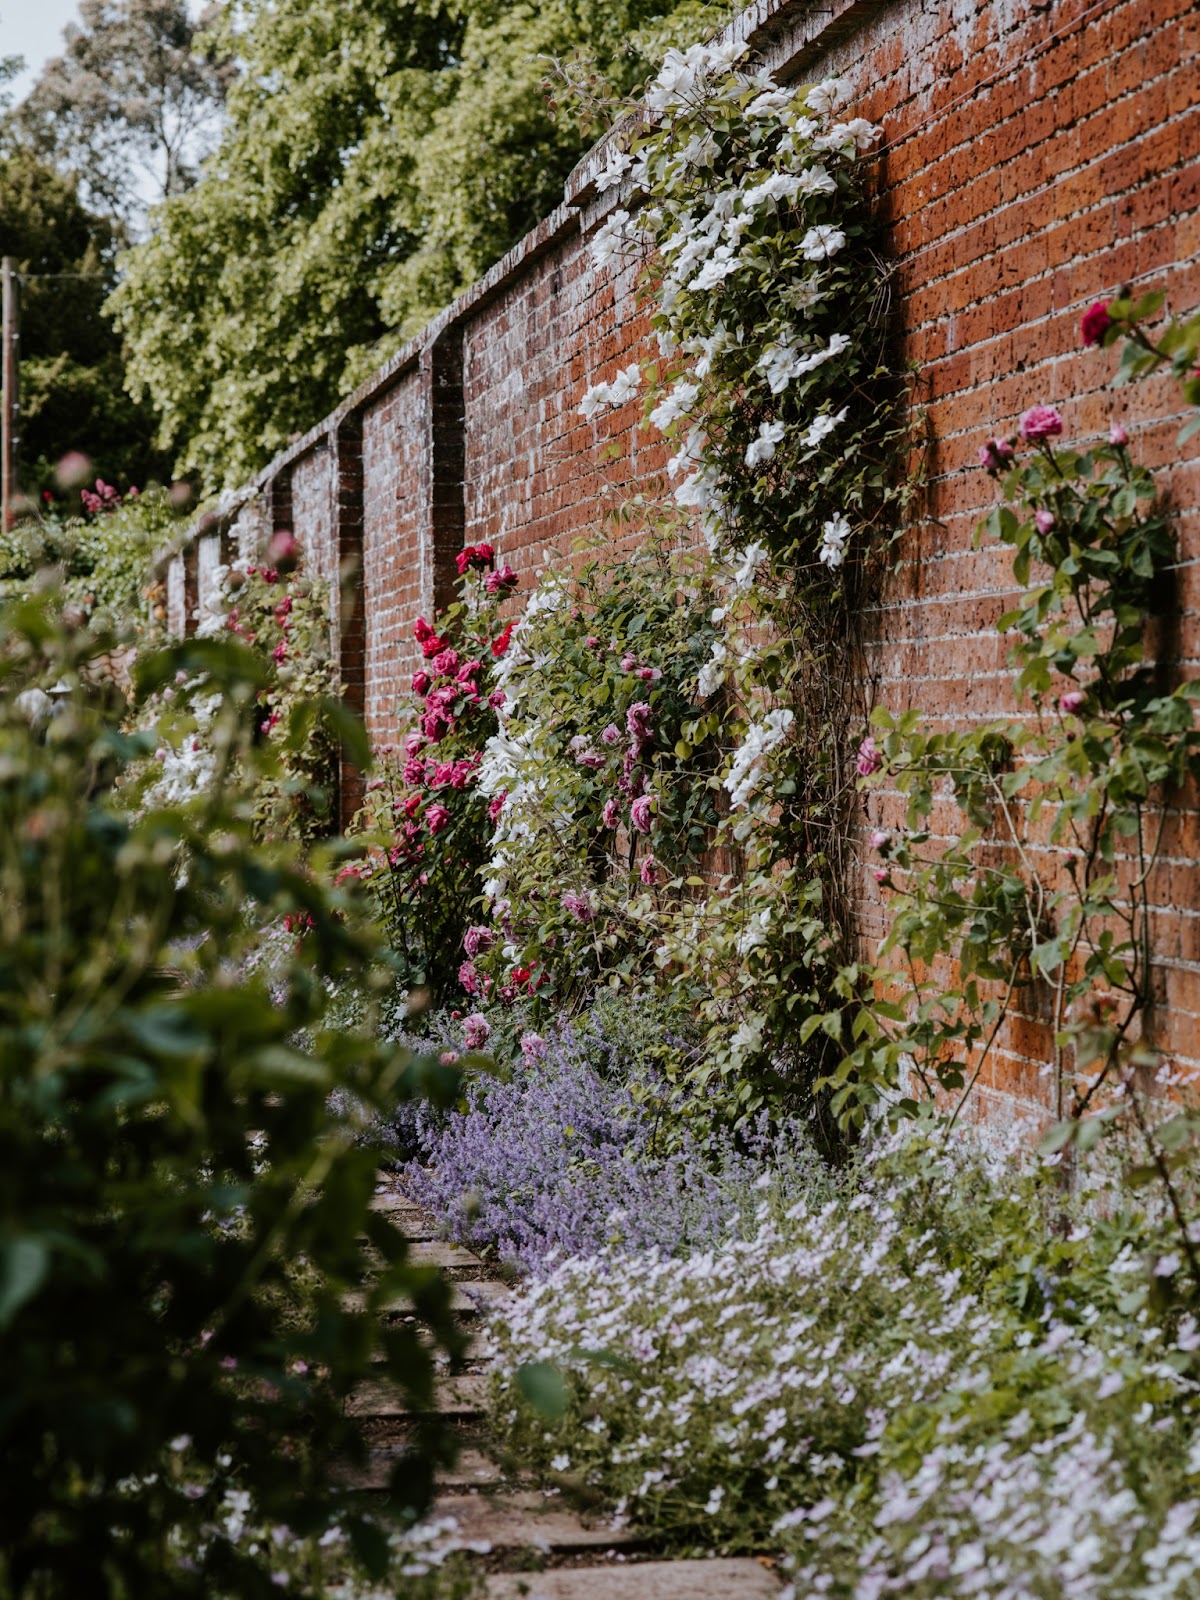 Garden wall with overgrown wildflowers
